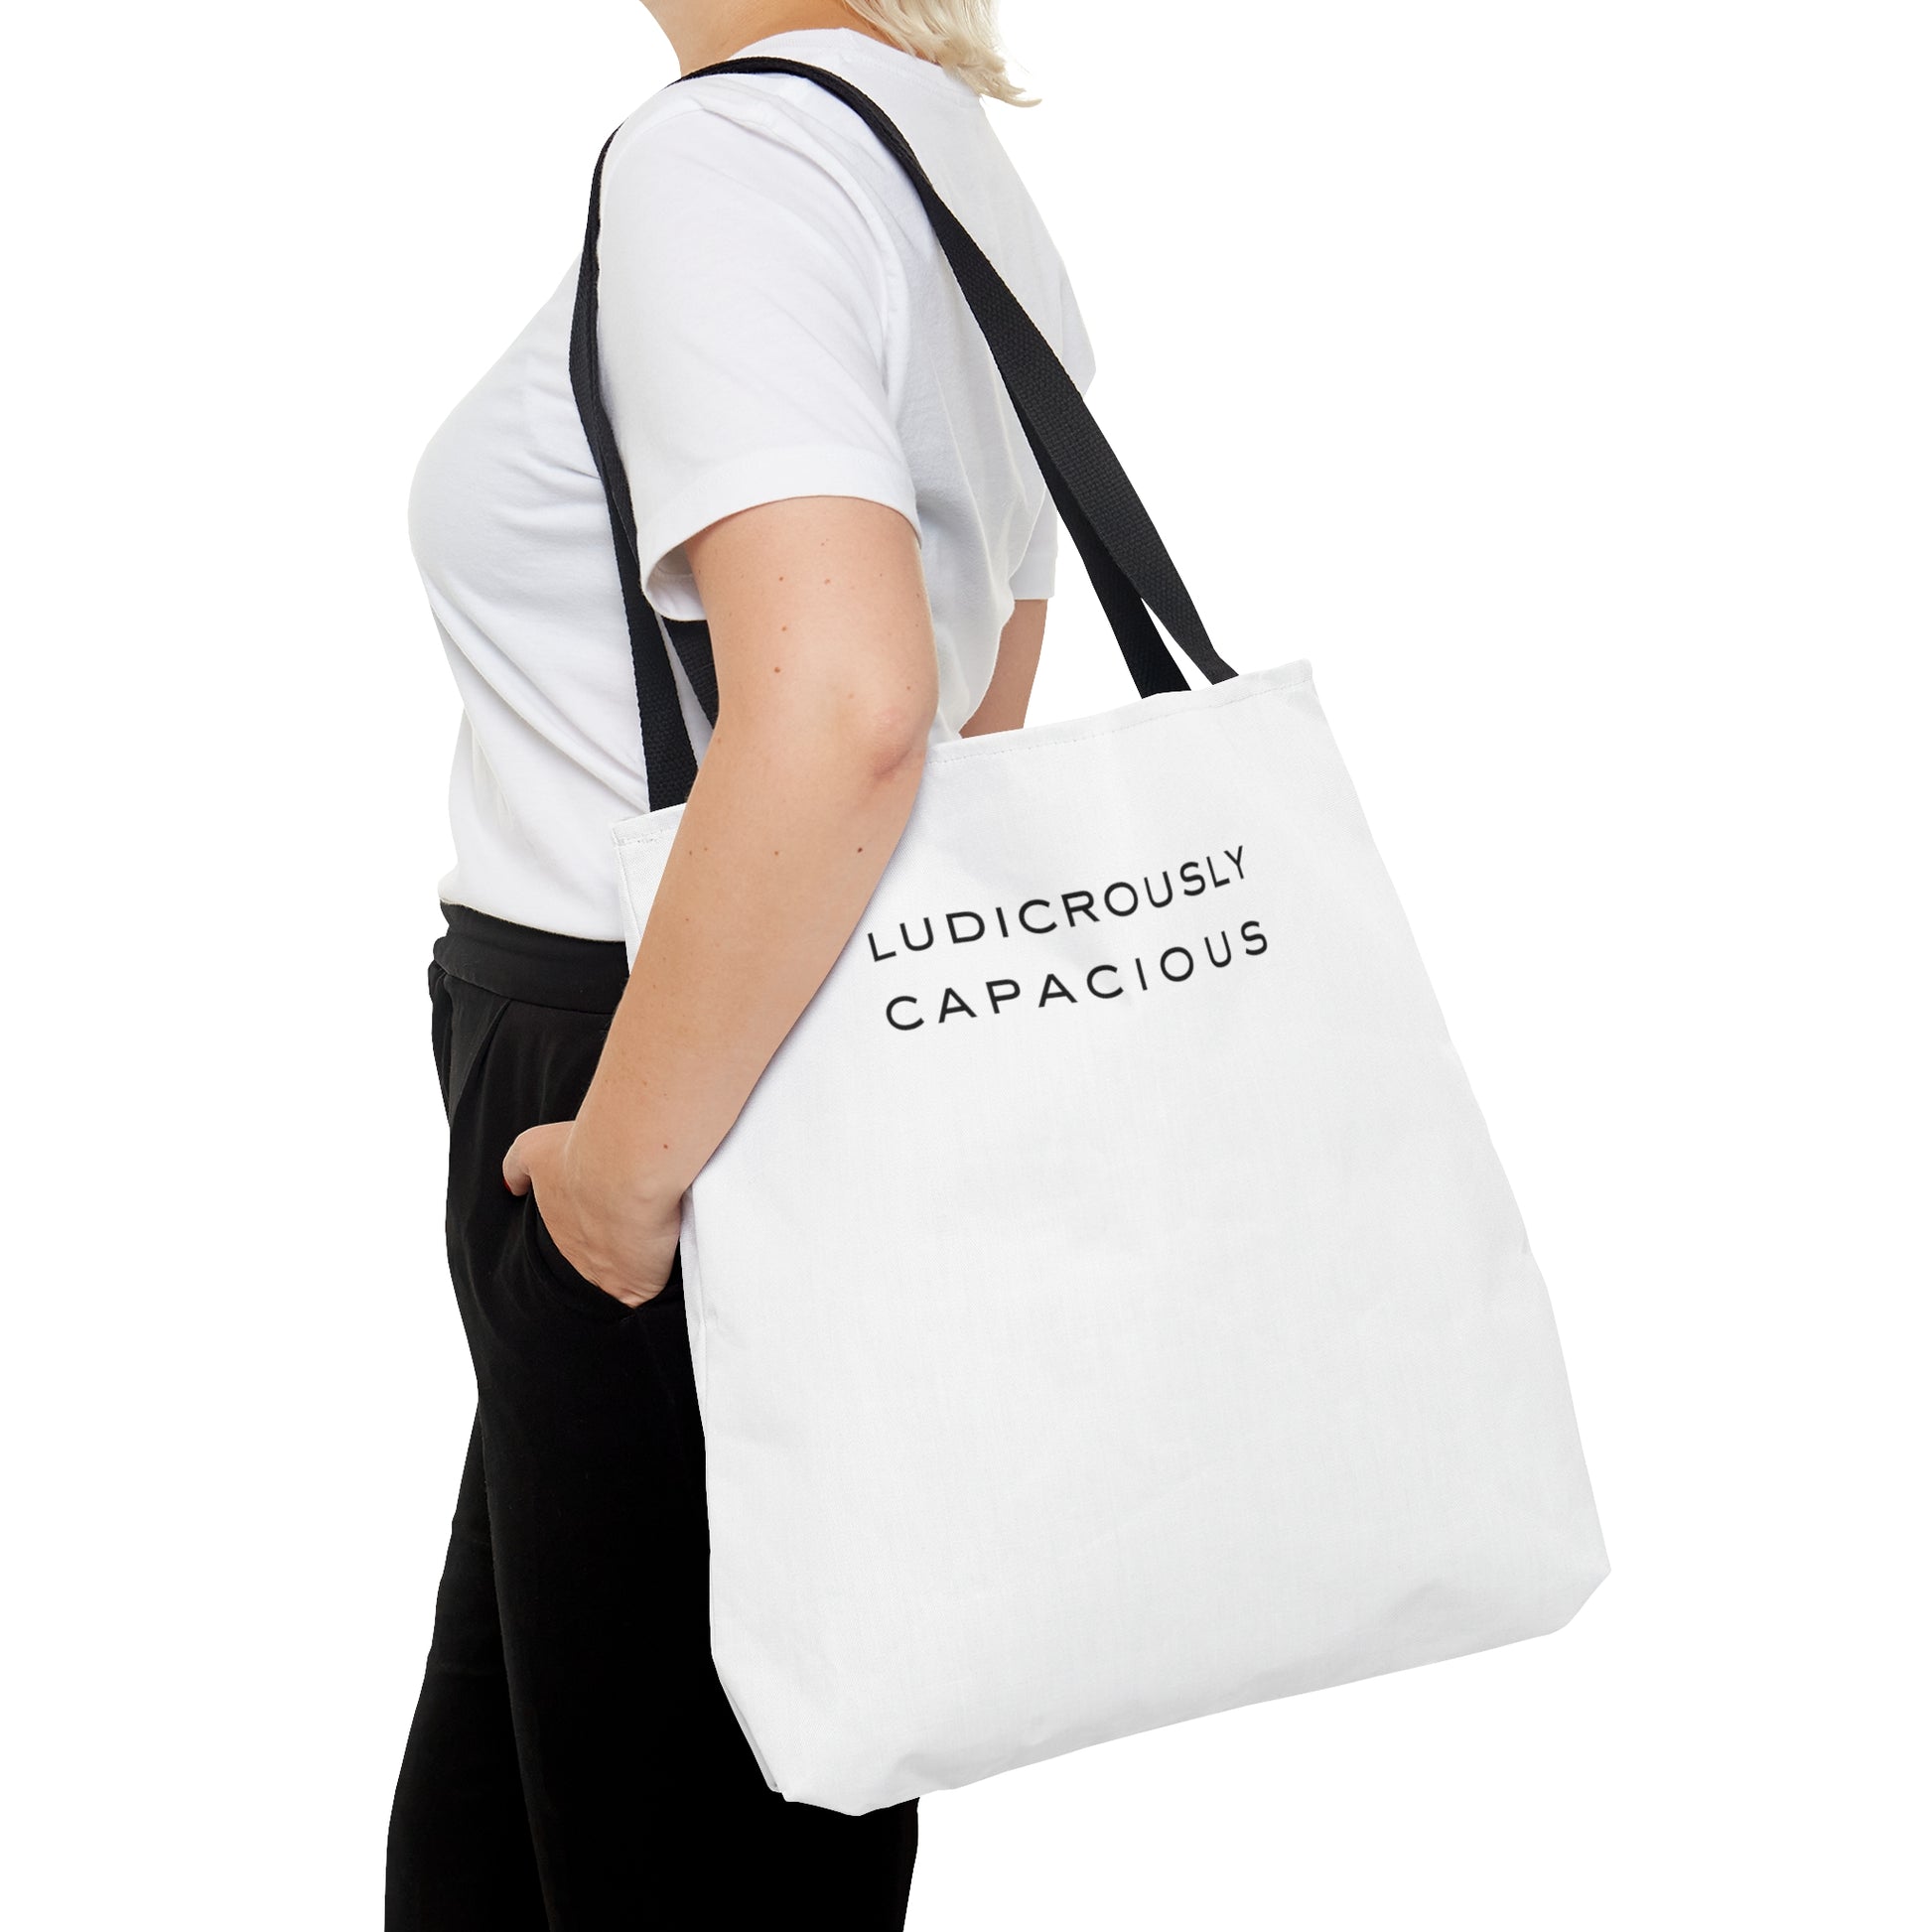 An unbiased size comparison between two ludicrously capacious totes —